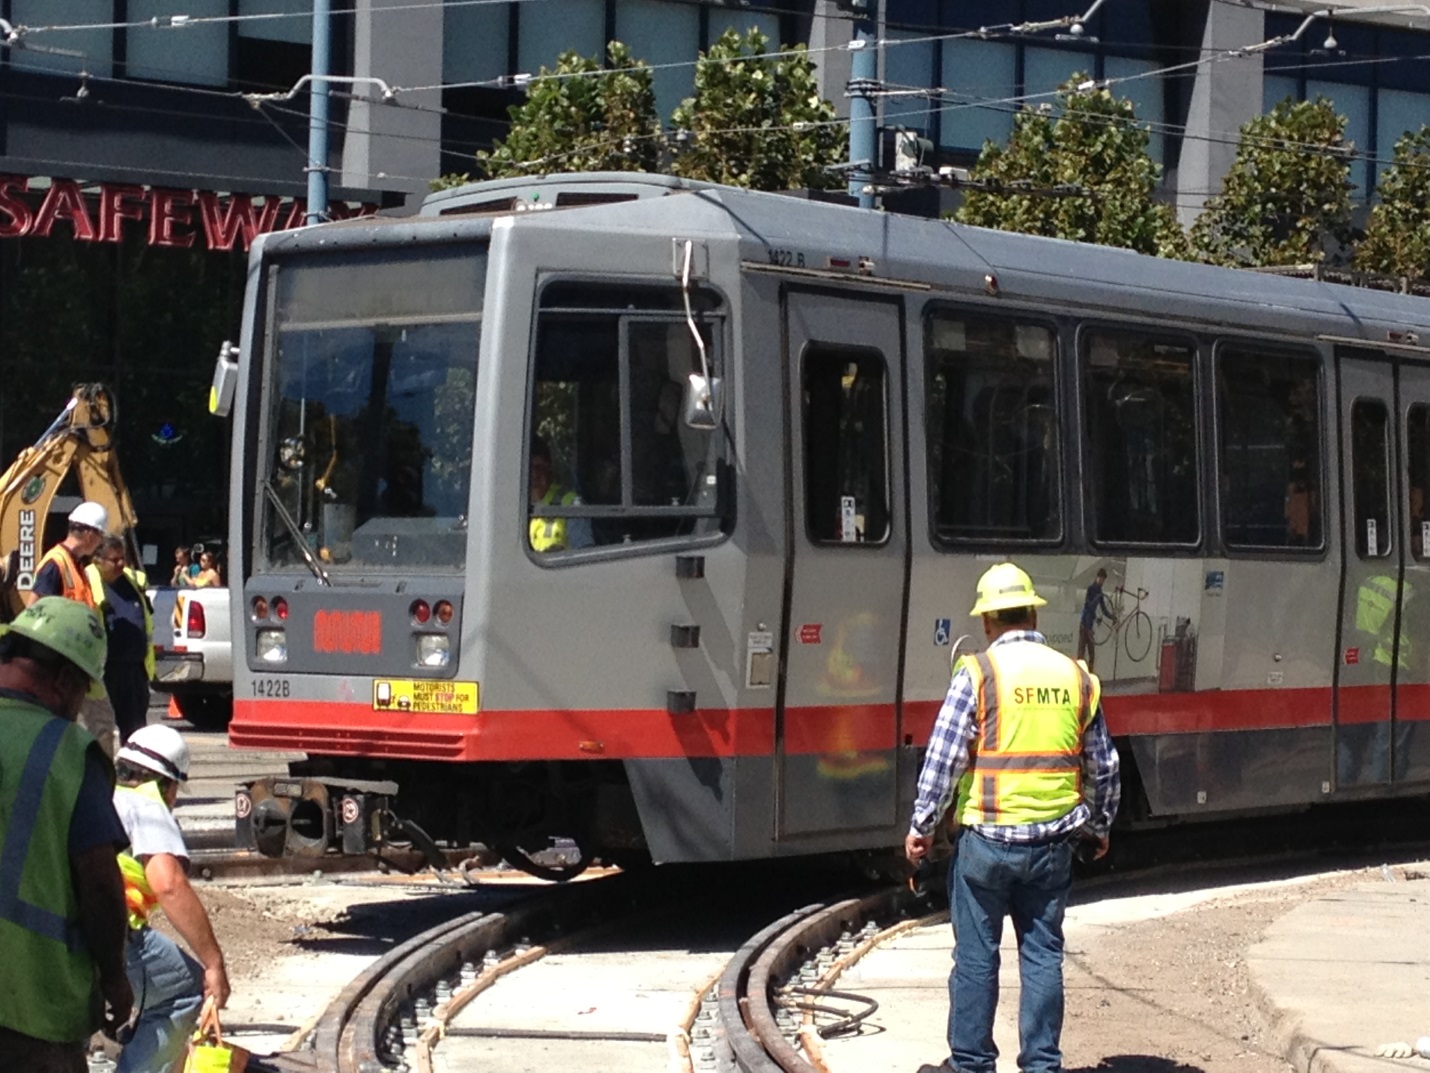 Gray and red Muni light rail train travels slowly through the construction area at 4th/King while crews and operations staff in safety vests and hard hats look on.